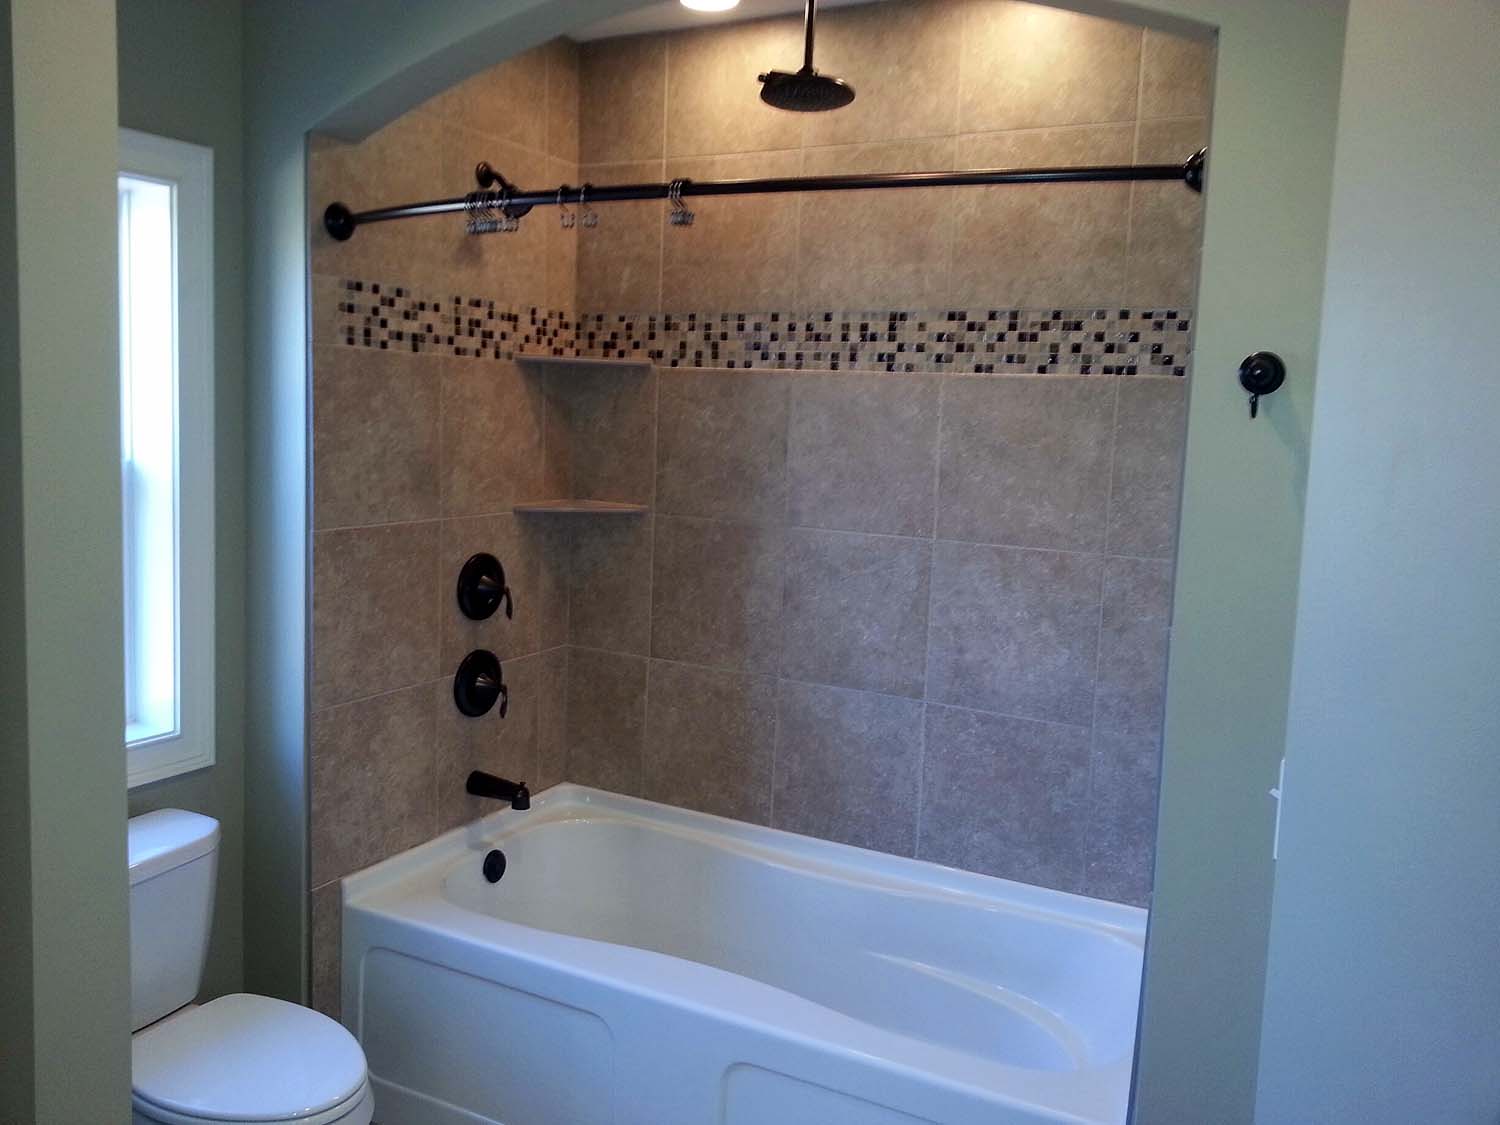 Bathtub with tile shower walls and arched wall above